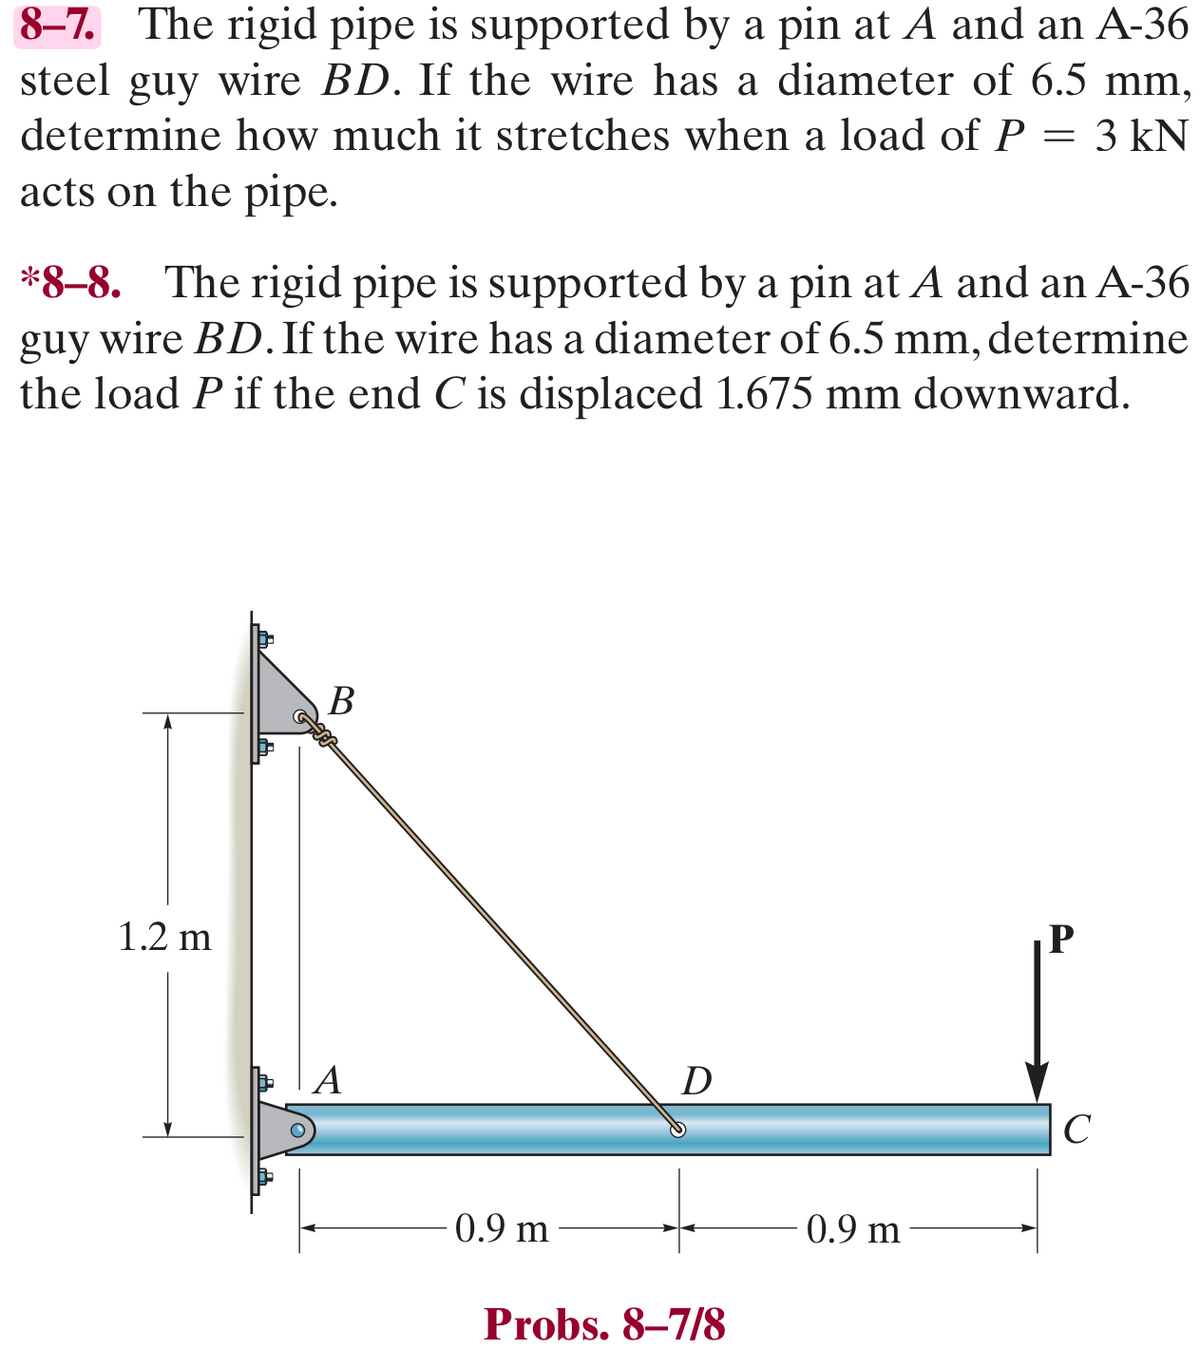 8-7. The rigid pipe is supported by a pin at A and an A-36
steel guy wire BD. If the wire has a diameter of 6.5 mm,
determine how much it stretches when a load of P = 3 kN
acts on the pipe.
*8-8. The rigid pipe is supported by a pin at A and an A-36
guy wire BD. If the wire has a diameter of 6.5 mm, determine
the load P if the end C is displaced 1.675 mm downward.
1.2 m
B
0.9 m
D
Probs. 8-7/8
0.9 m
P
с